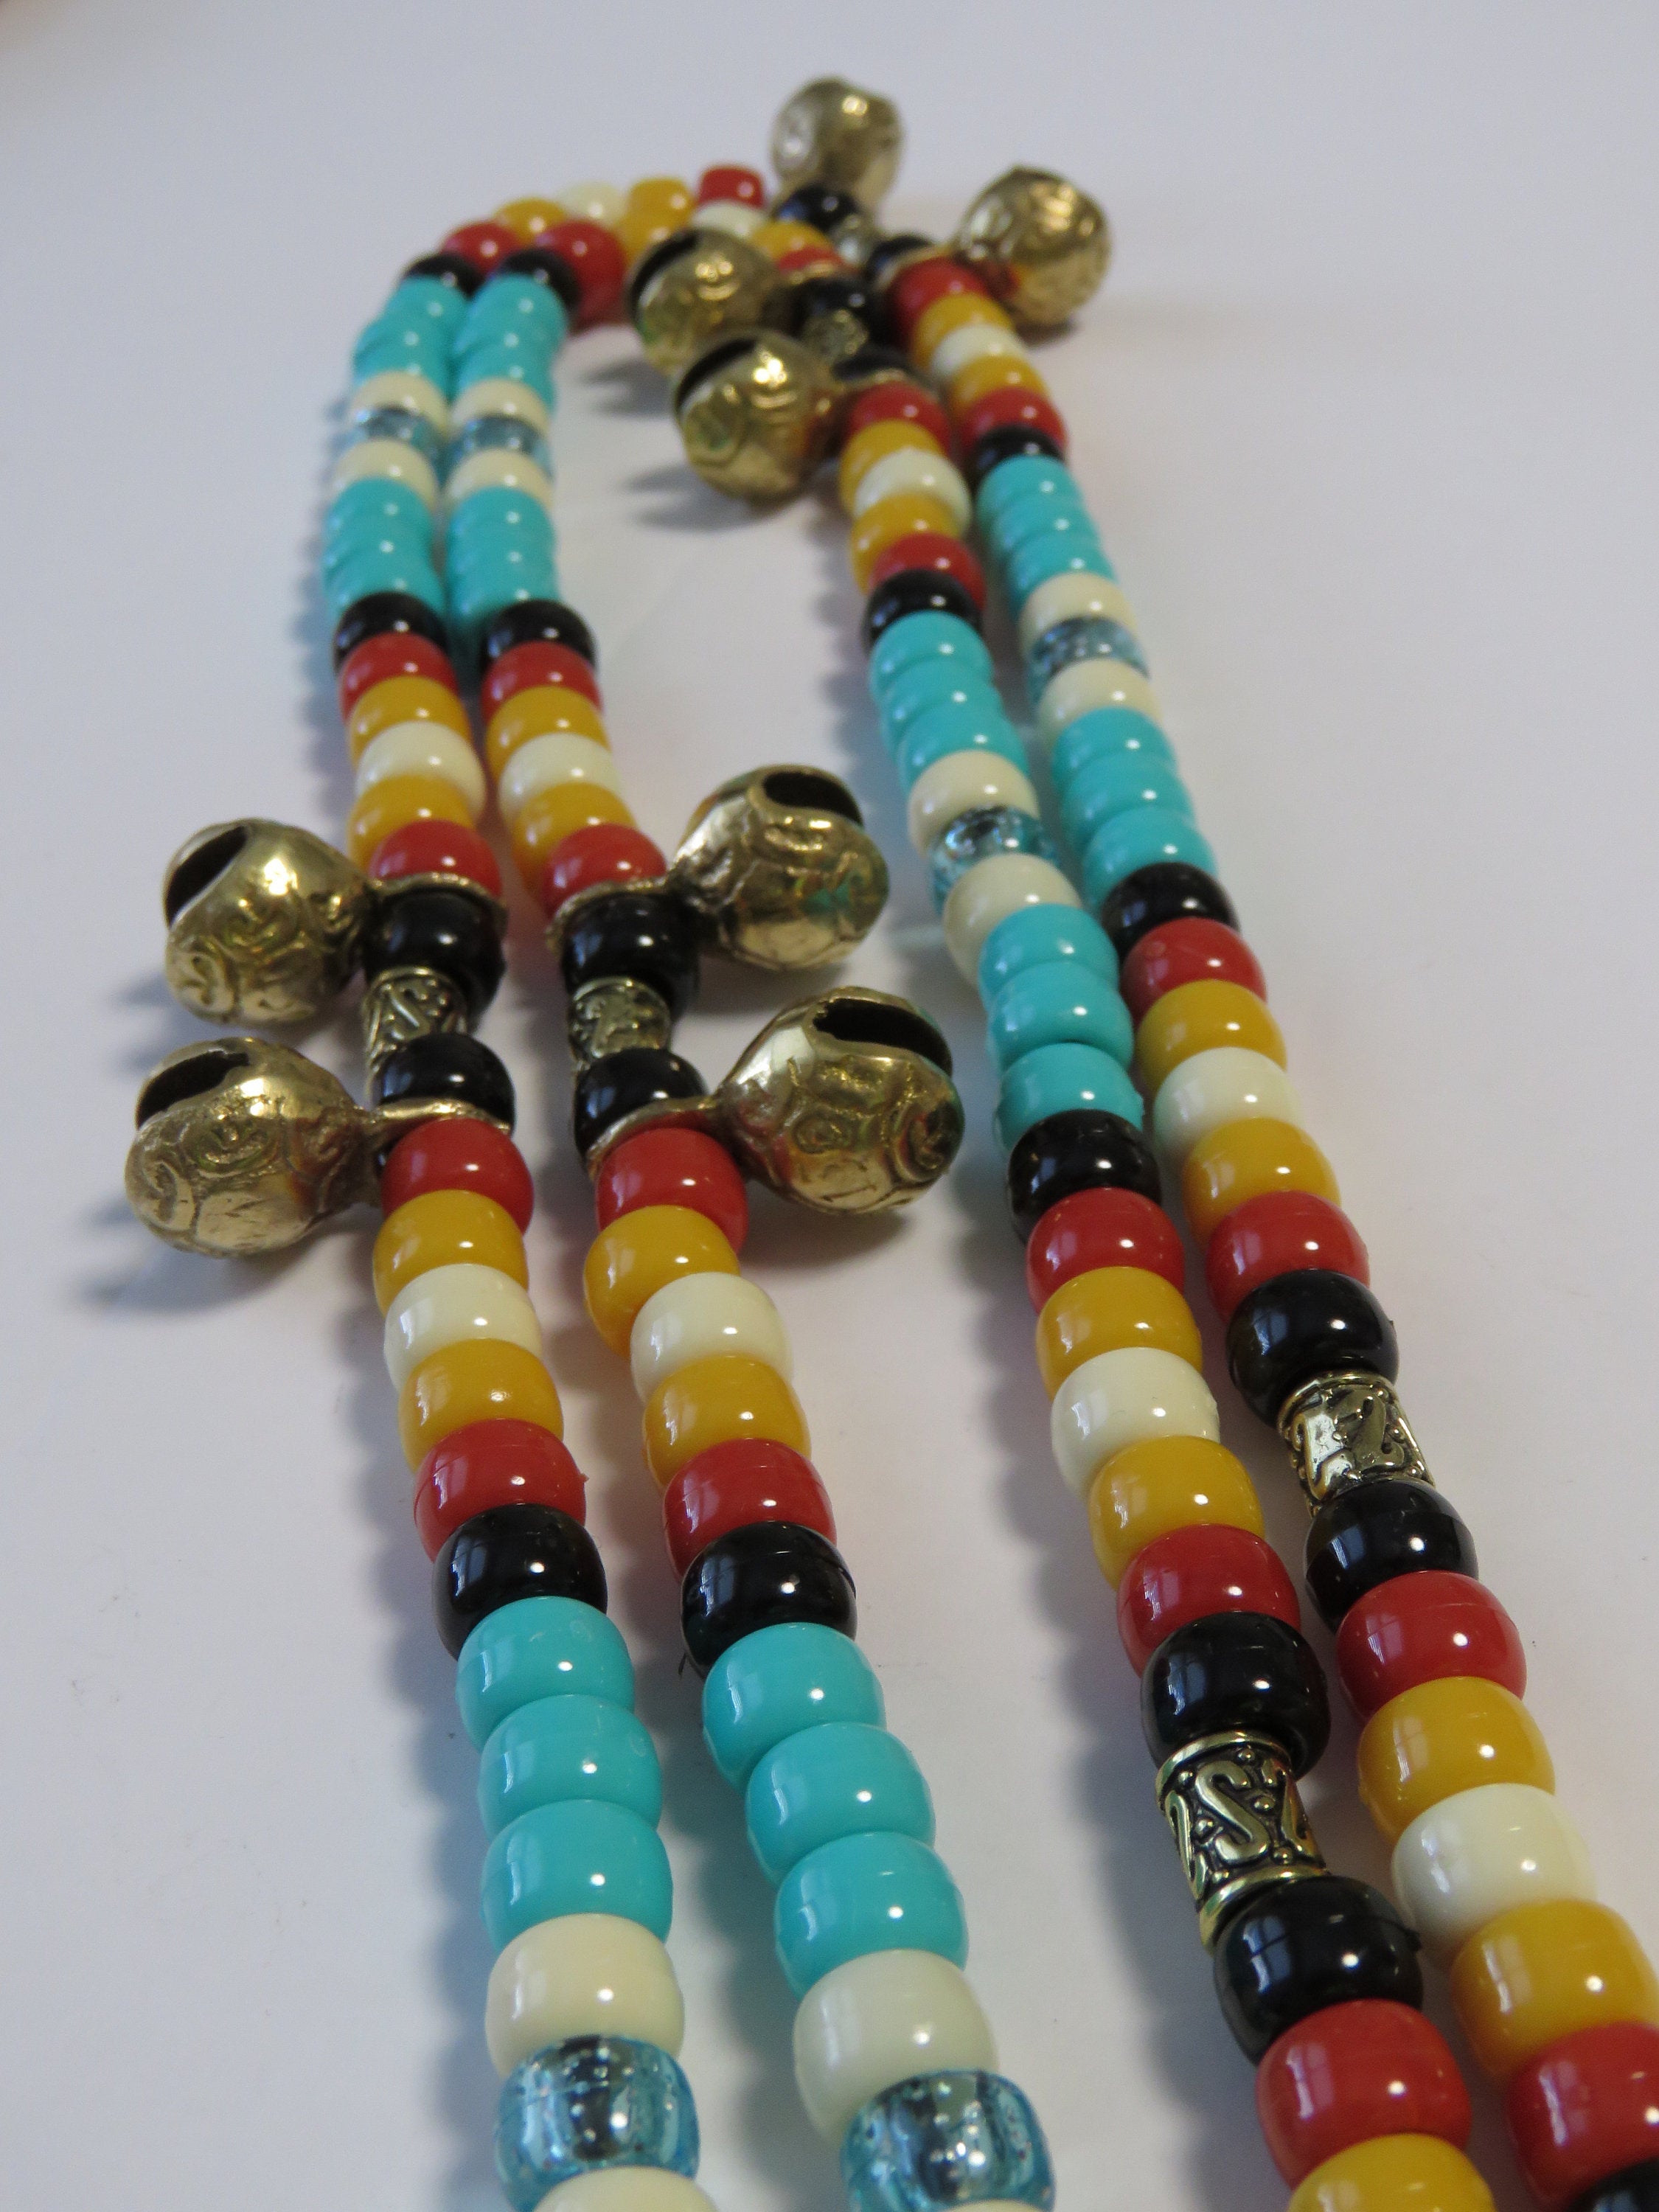 Rhythm Beads Necklace, POCHAHONTAS 2, Horse Wedding Photos, Trail Beads for Horses,Horse Necklace, Speed Beads, Horse Bells